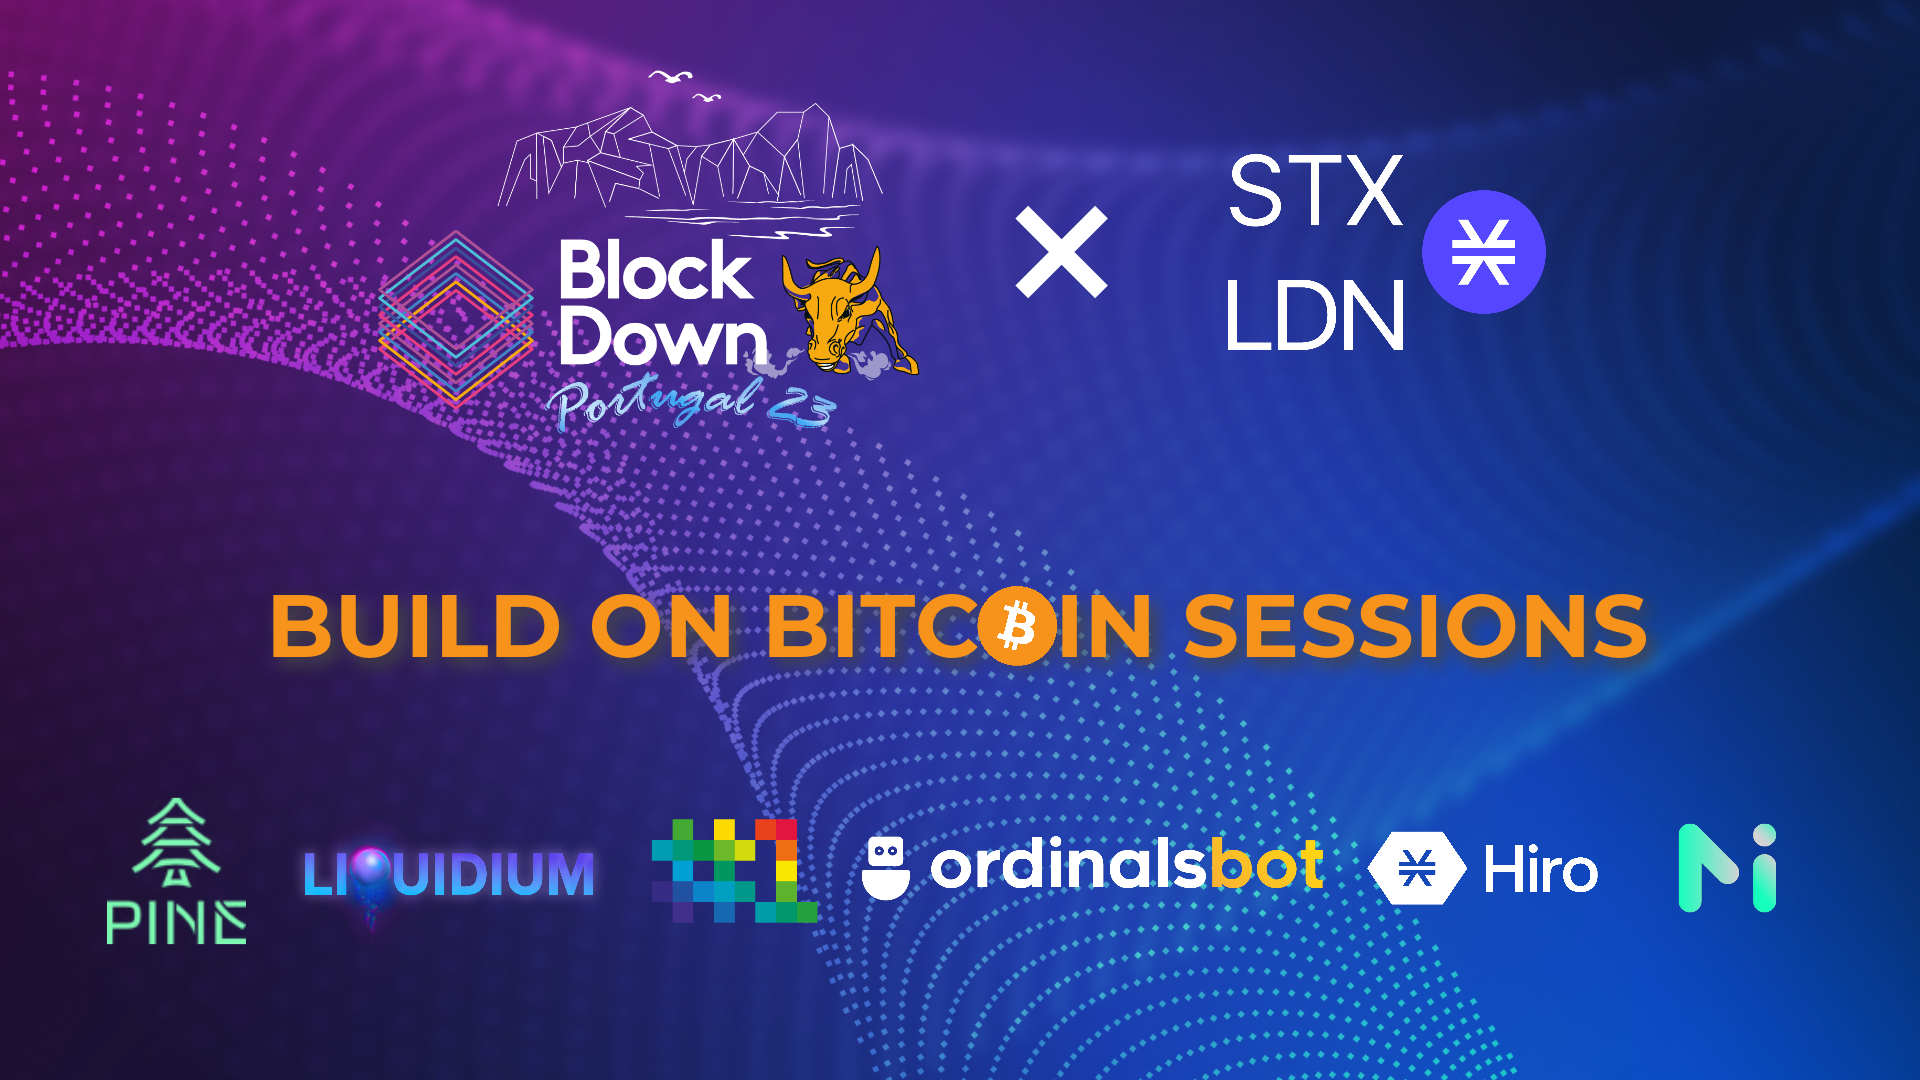 STX:LDN Partners with Blockdown Festival to Bring Bitcoin Builders to the Party!